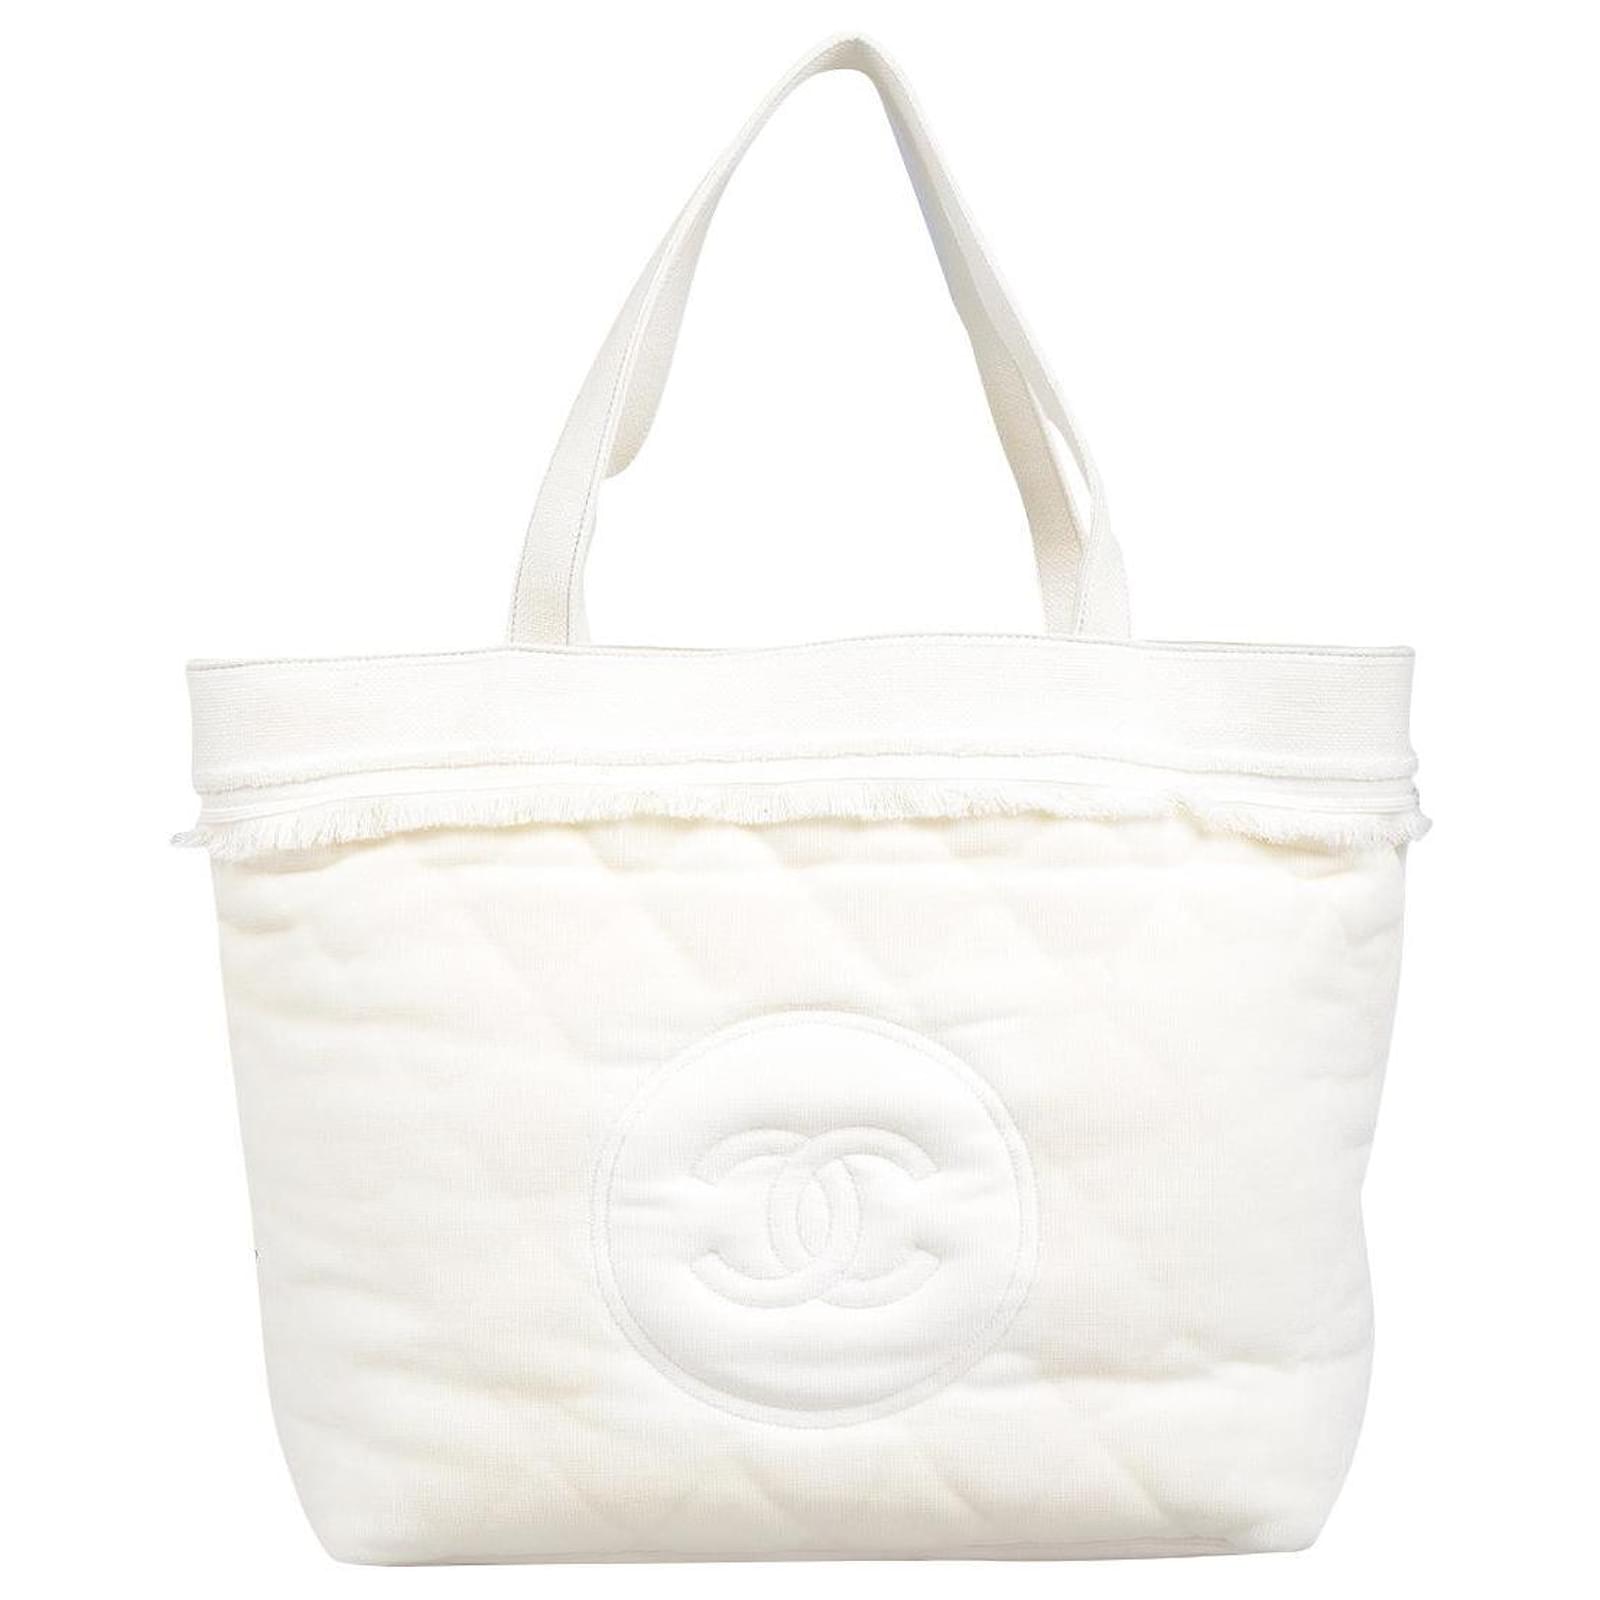 Chanel Terry Cloth Beach Tote Bag with the blanket White Cotton